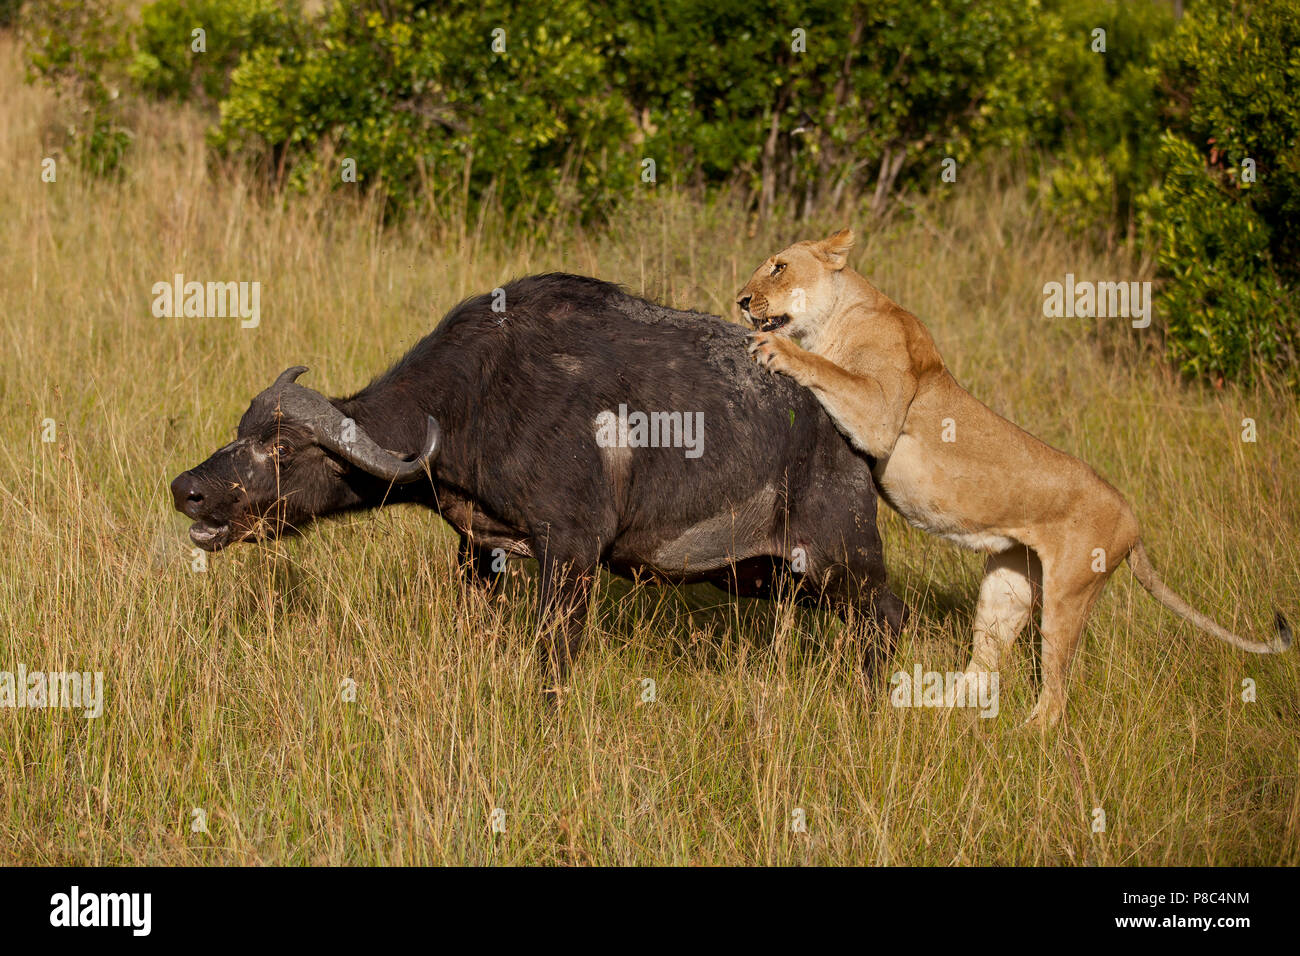 Lion Vs Buffalo High Resolution Stock Photography and Images - Alamy